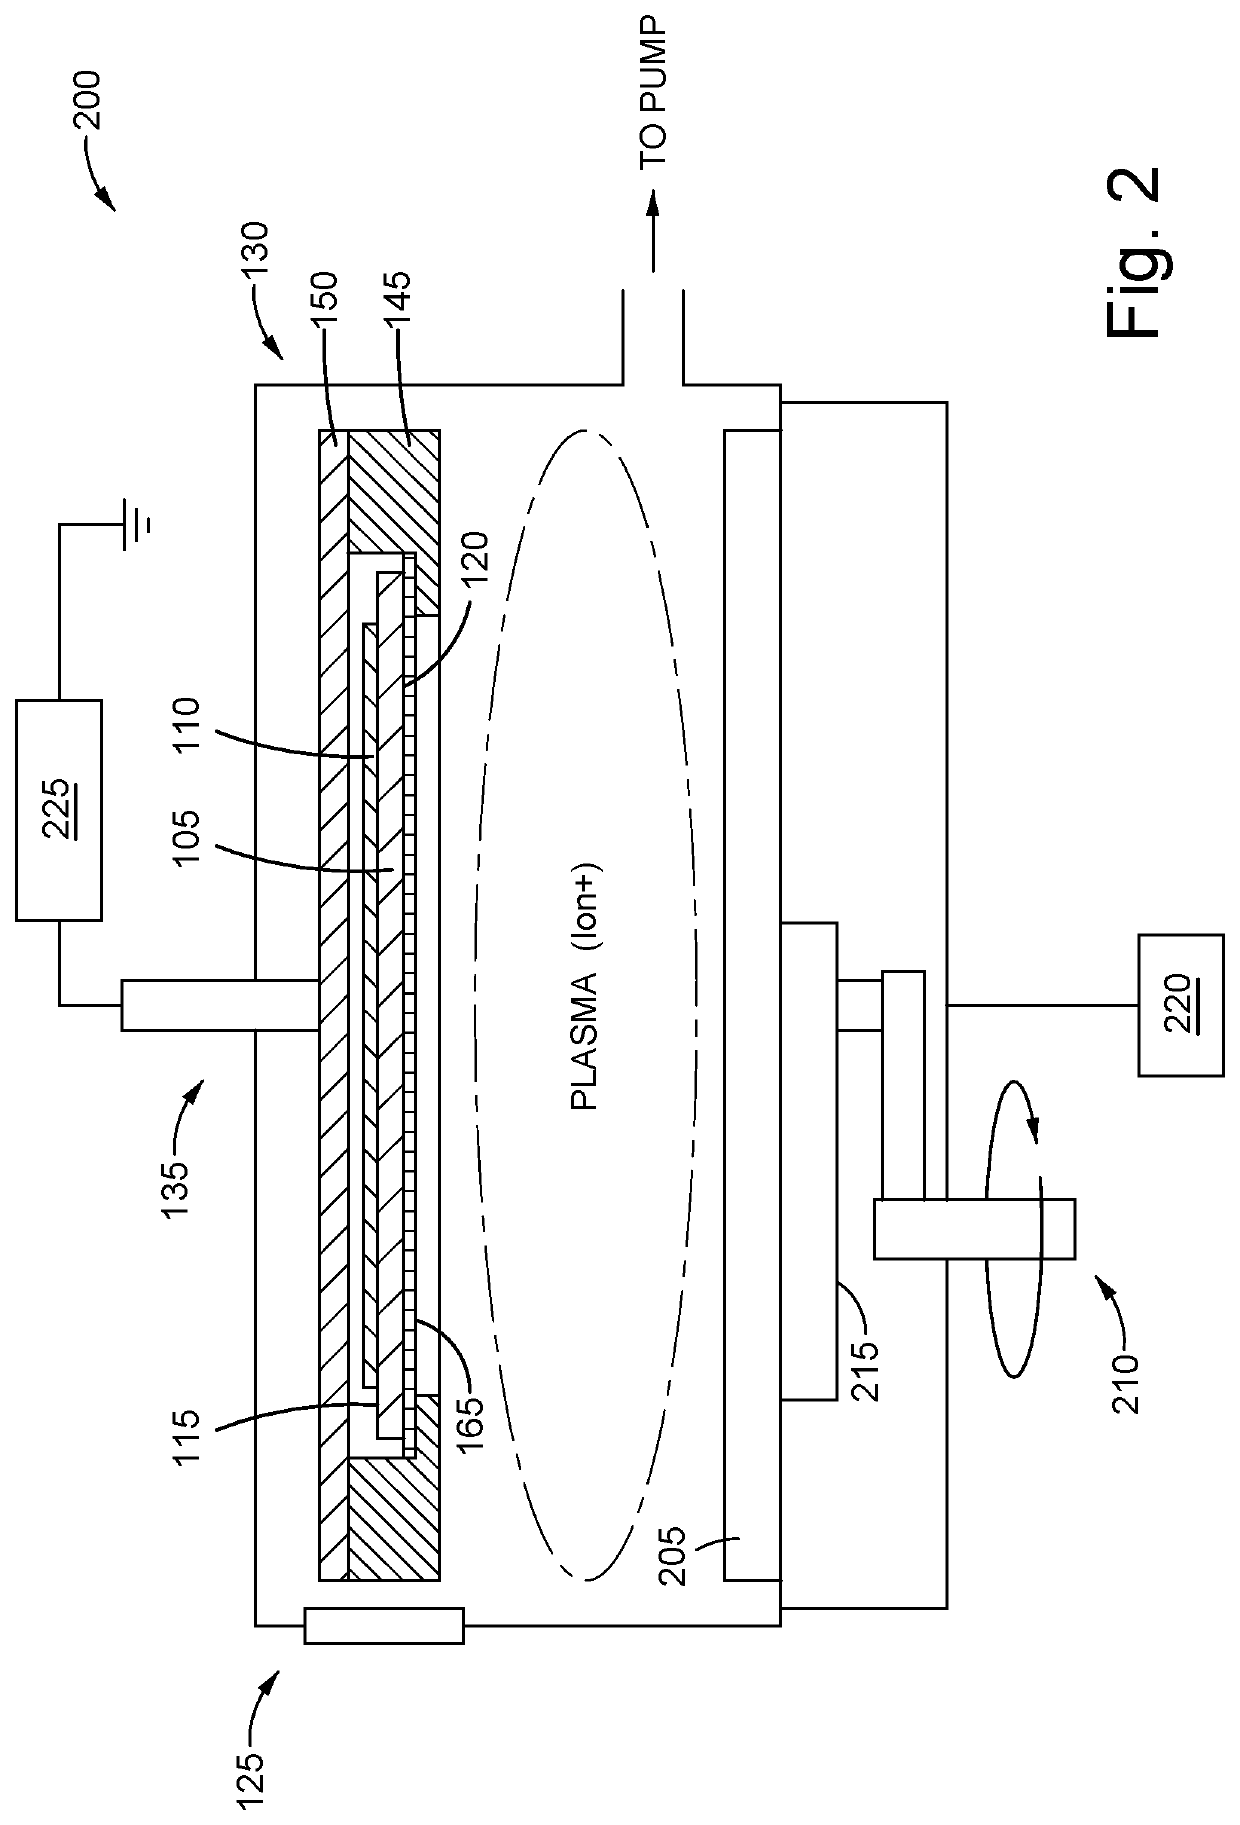 Methods and apparatus to eliminate wafer bow for CVD and patterning hvm systems